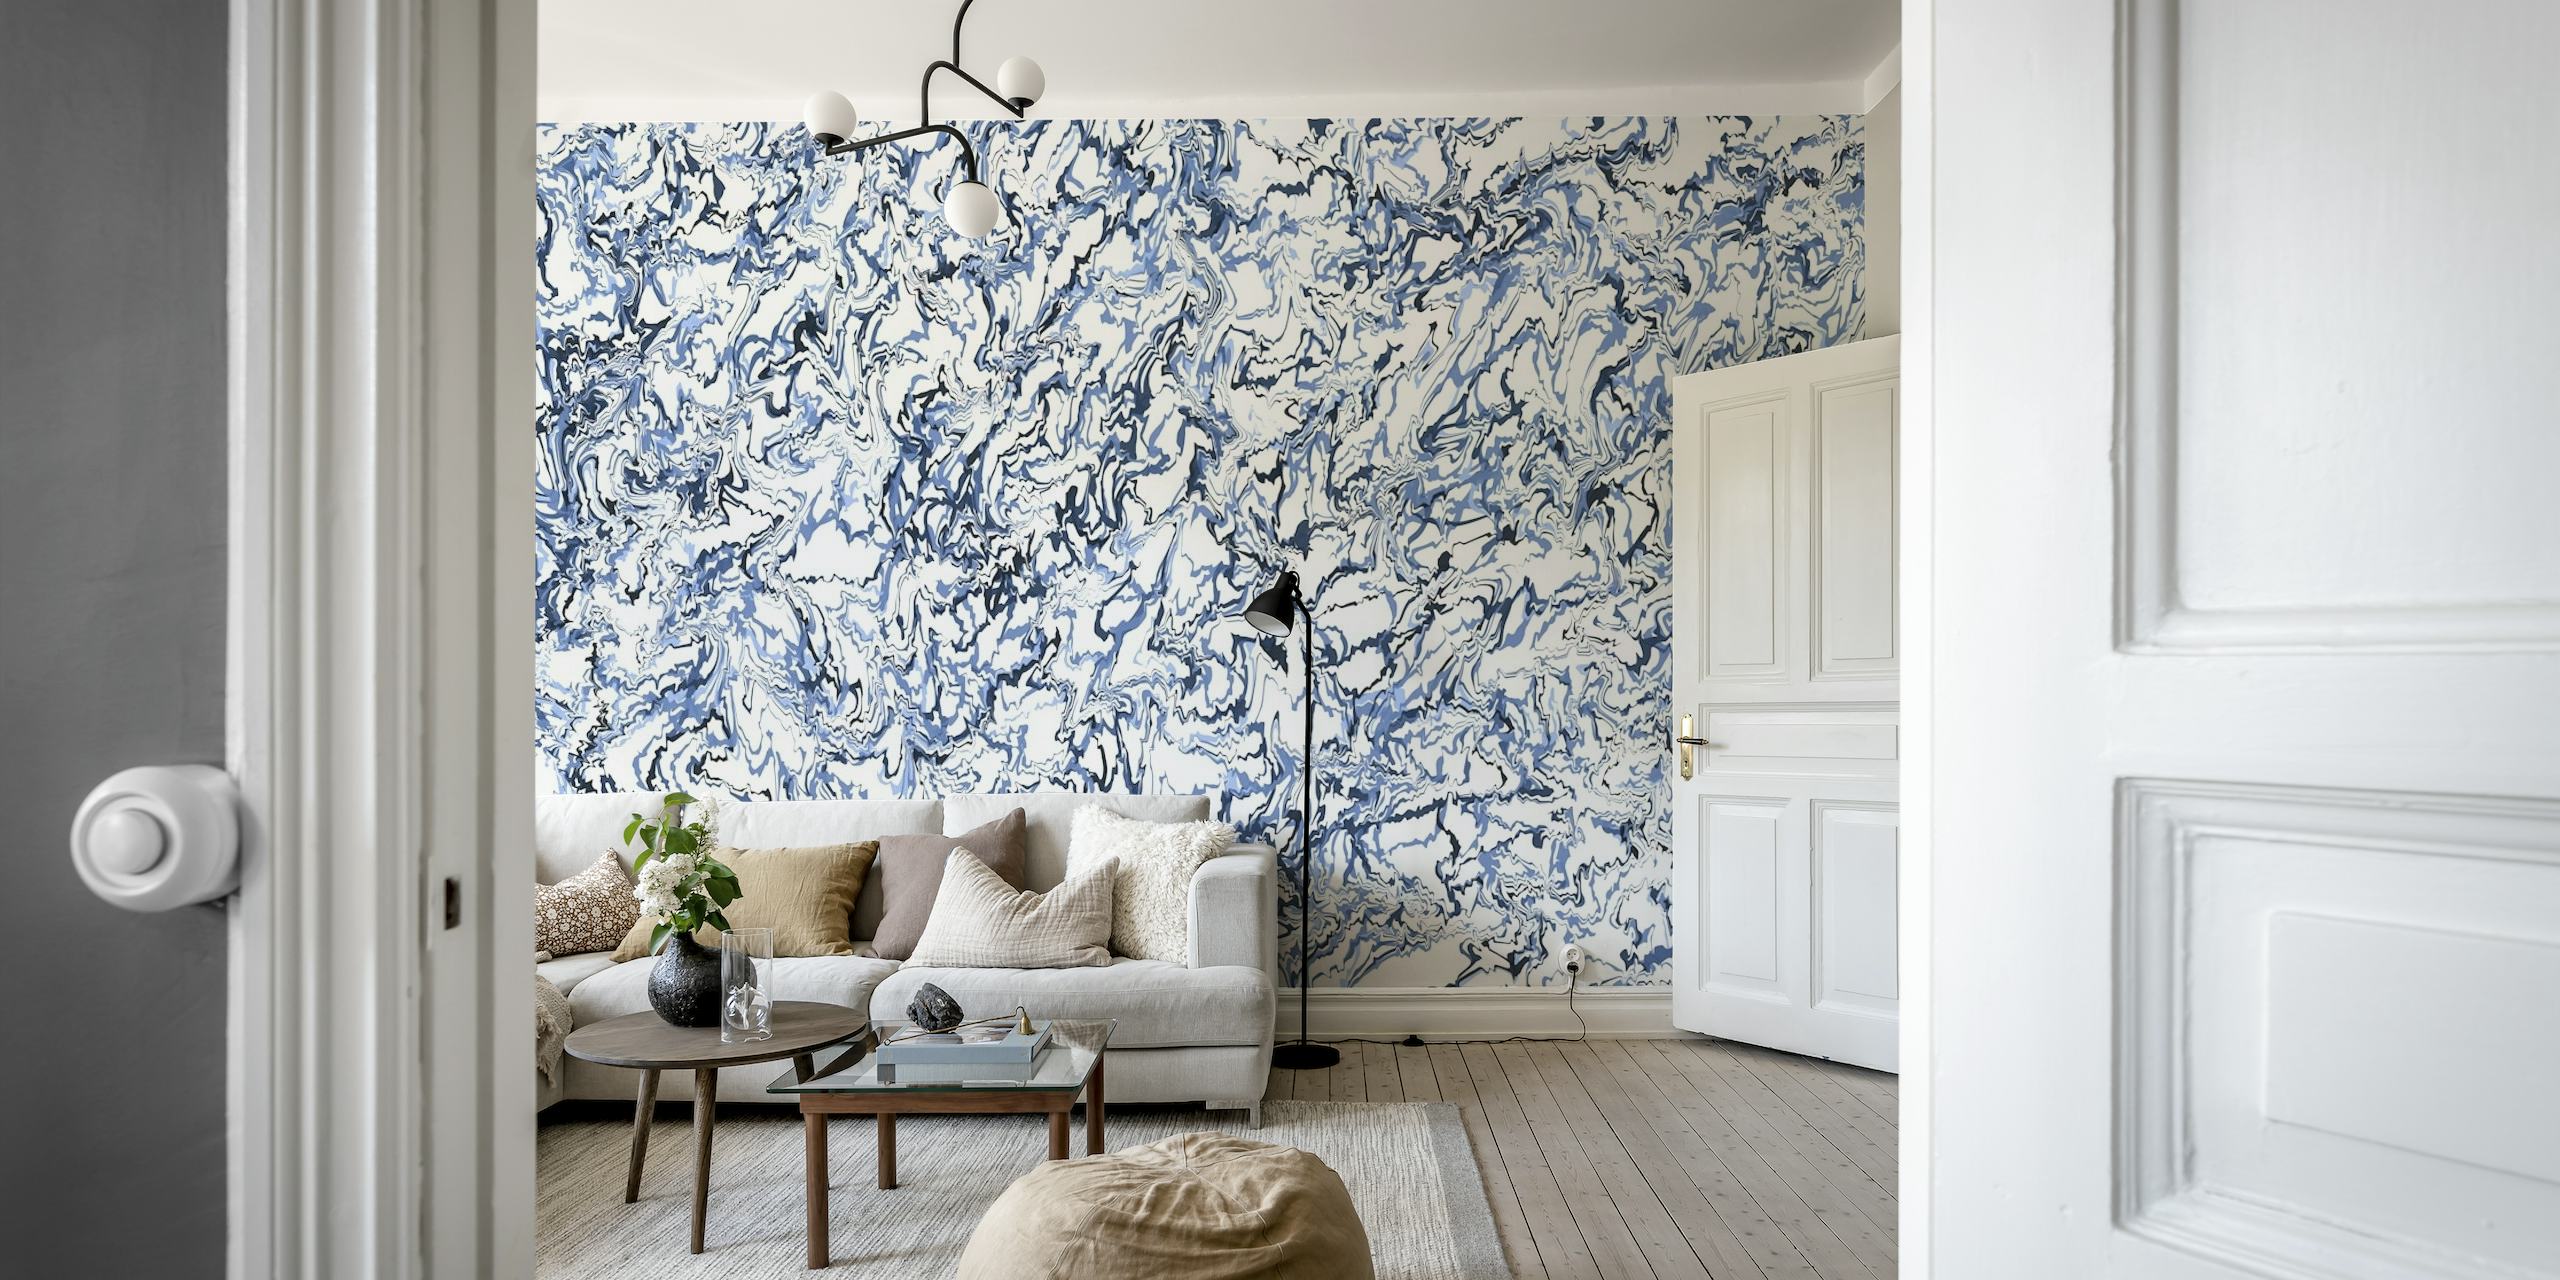 Abstract blue pour painting wall mural with swirling patterns